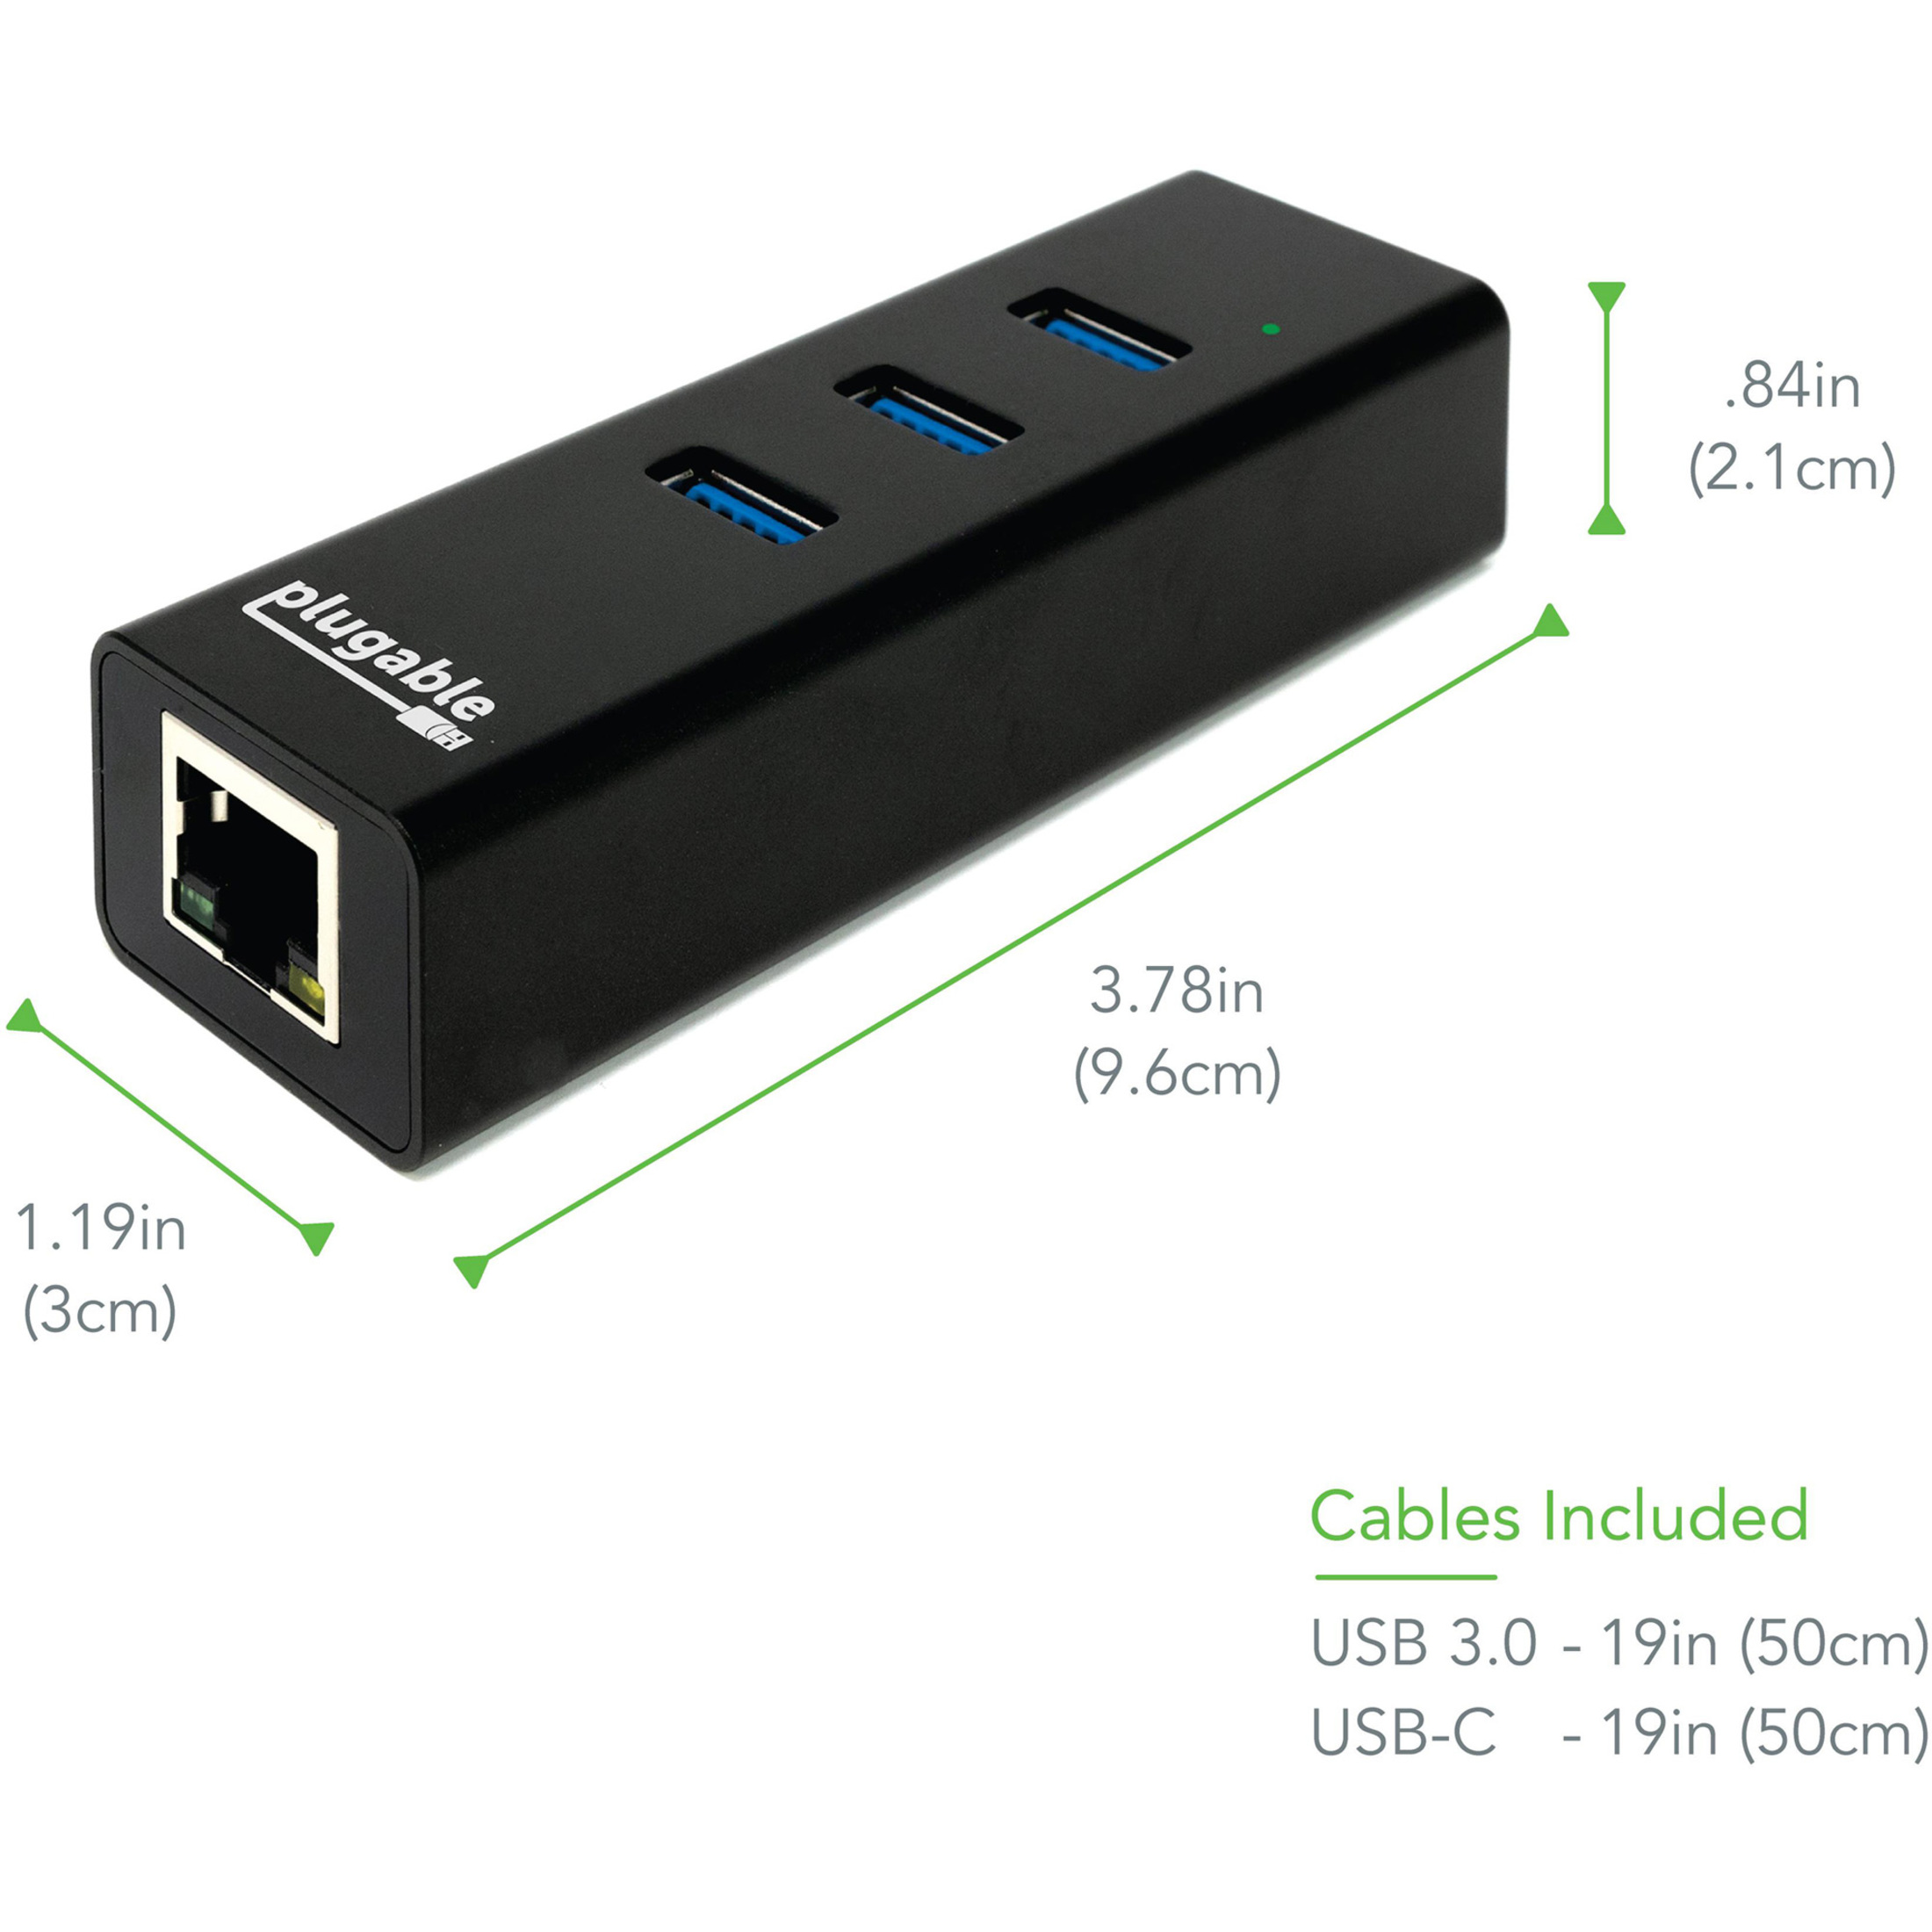 Plugable USB Hub with Ethernet, 3 port USB 3.0 Bus Powered Hub with Gigabit Ethernet Compatible with Windows, MacBook, Linux, Chrome OS, Includes USB C and USB 3.0 Cables - image 4 of 7